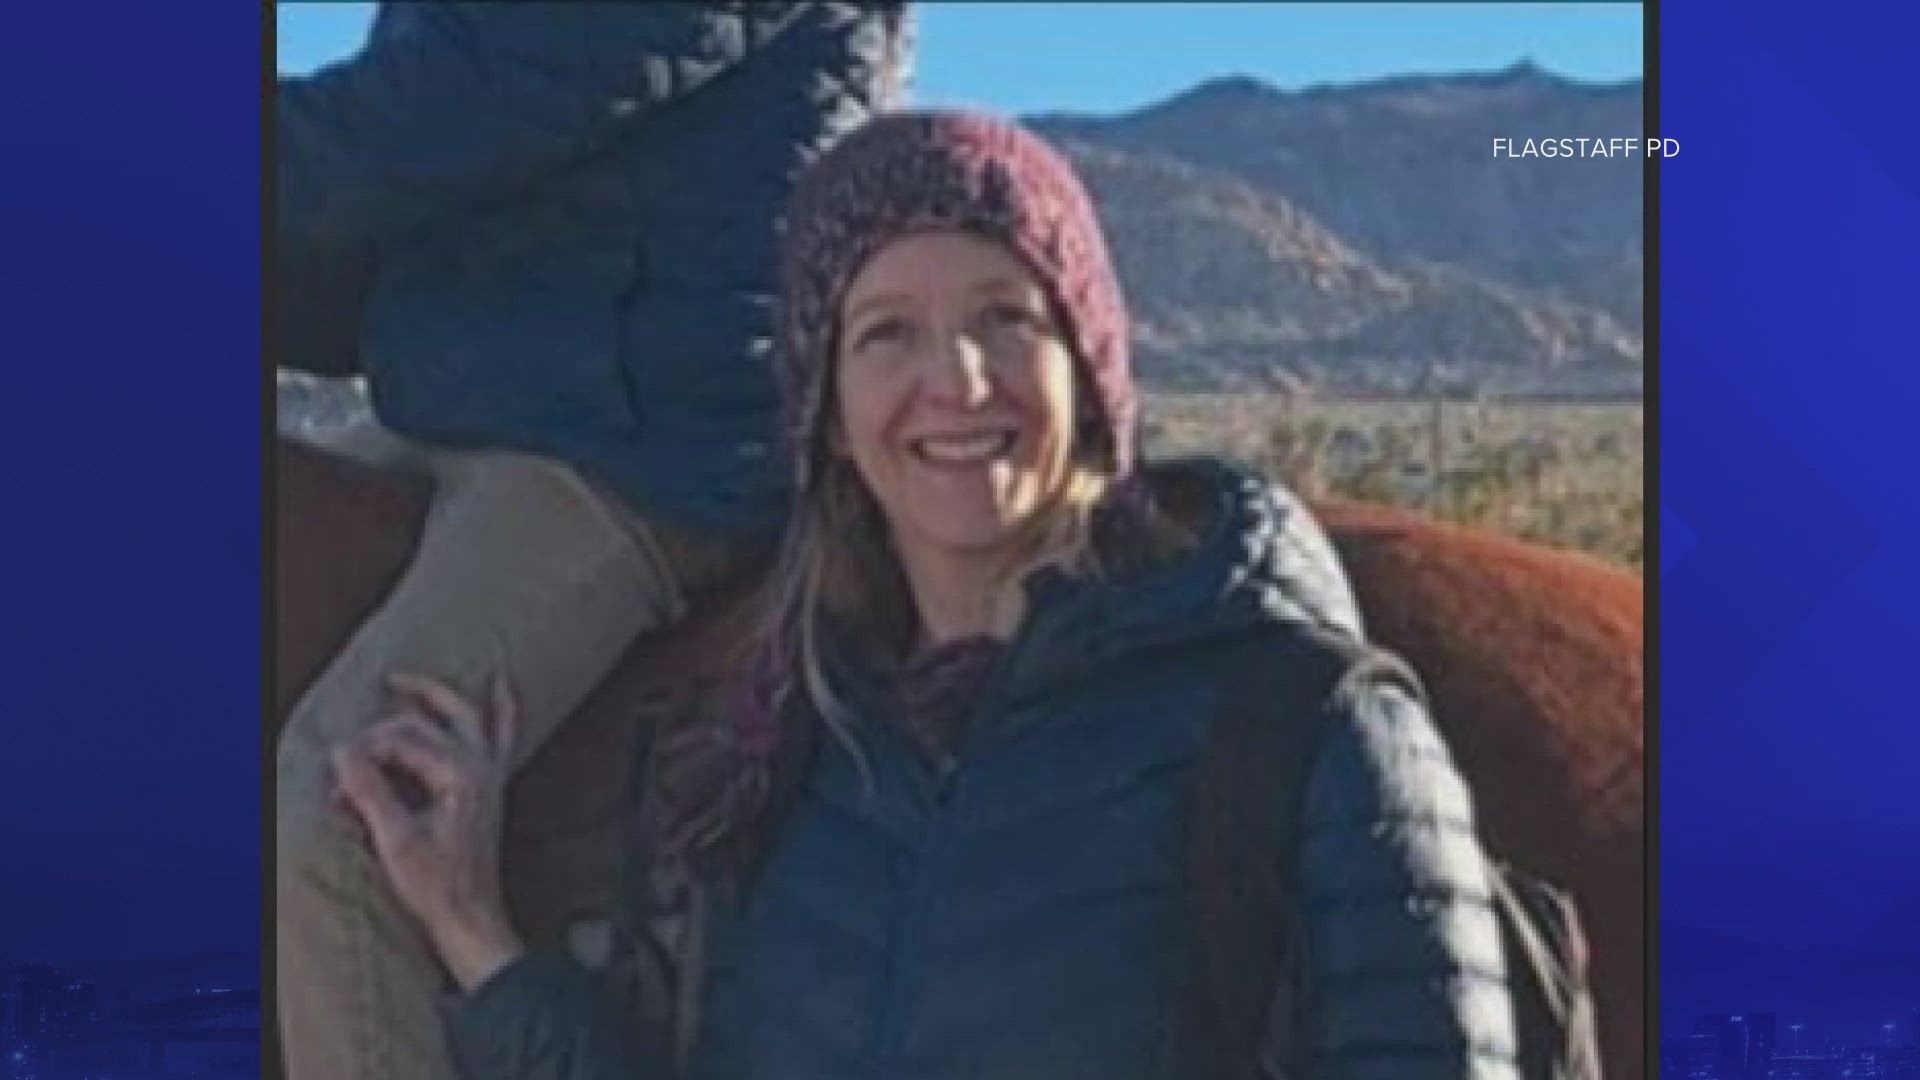 Kelly Paduchowski, 45, was last seen around 1:30 p.m. on June 30. Anyone with information should call the Flagstaff Police Department at 928-774-1414.